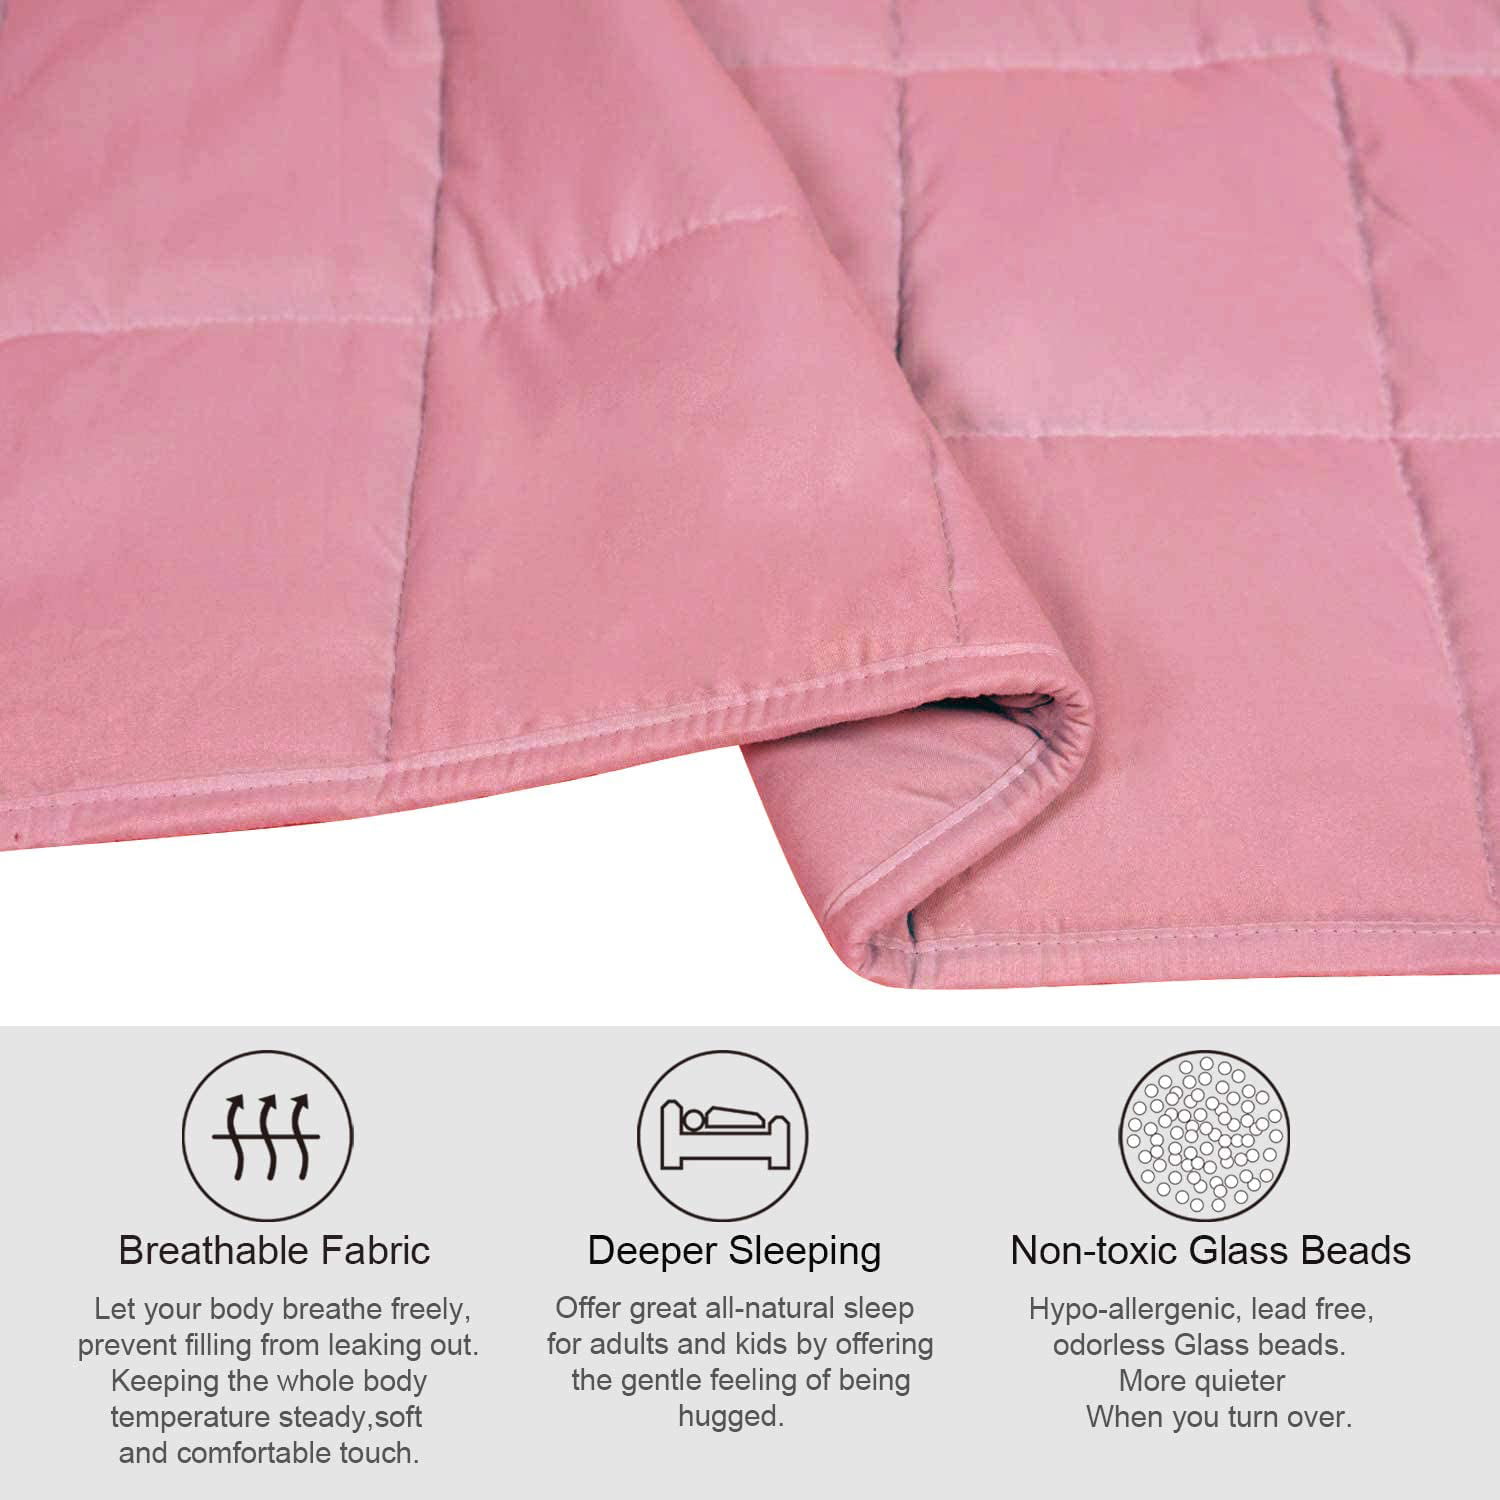 Queen Size Weighted Blanket Glass Beads and Eyemask 60x80 Pink Viviland Weighted Blanket Set 15 lbs with Removable Plush Cover Gift for Adult Women Men